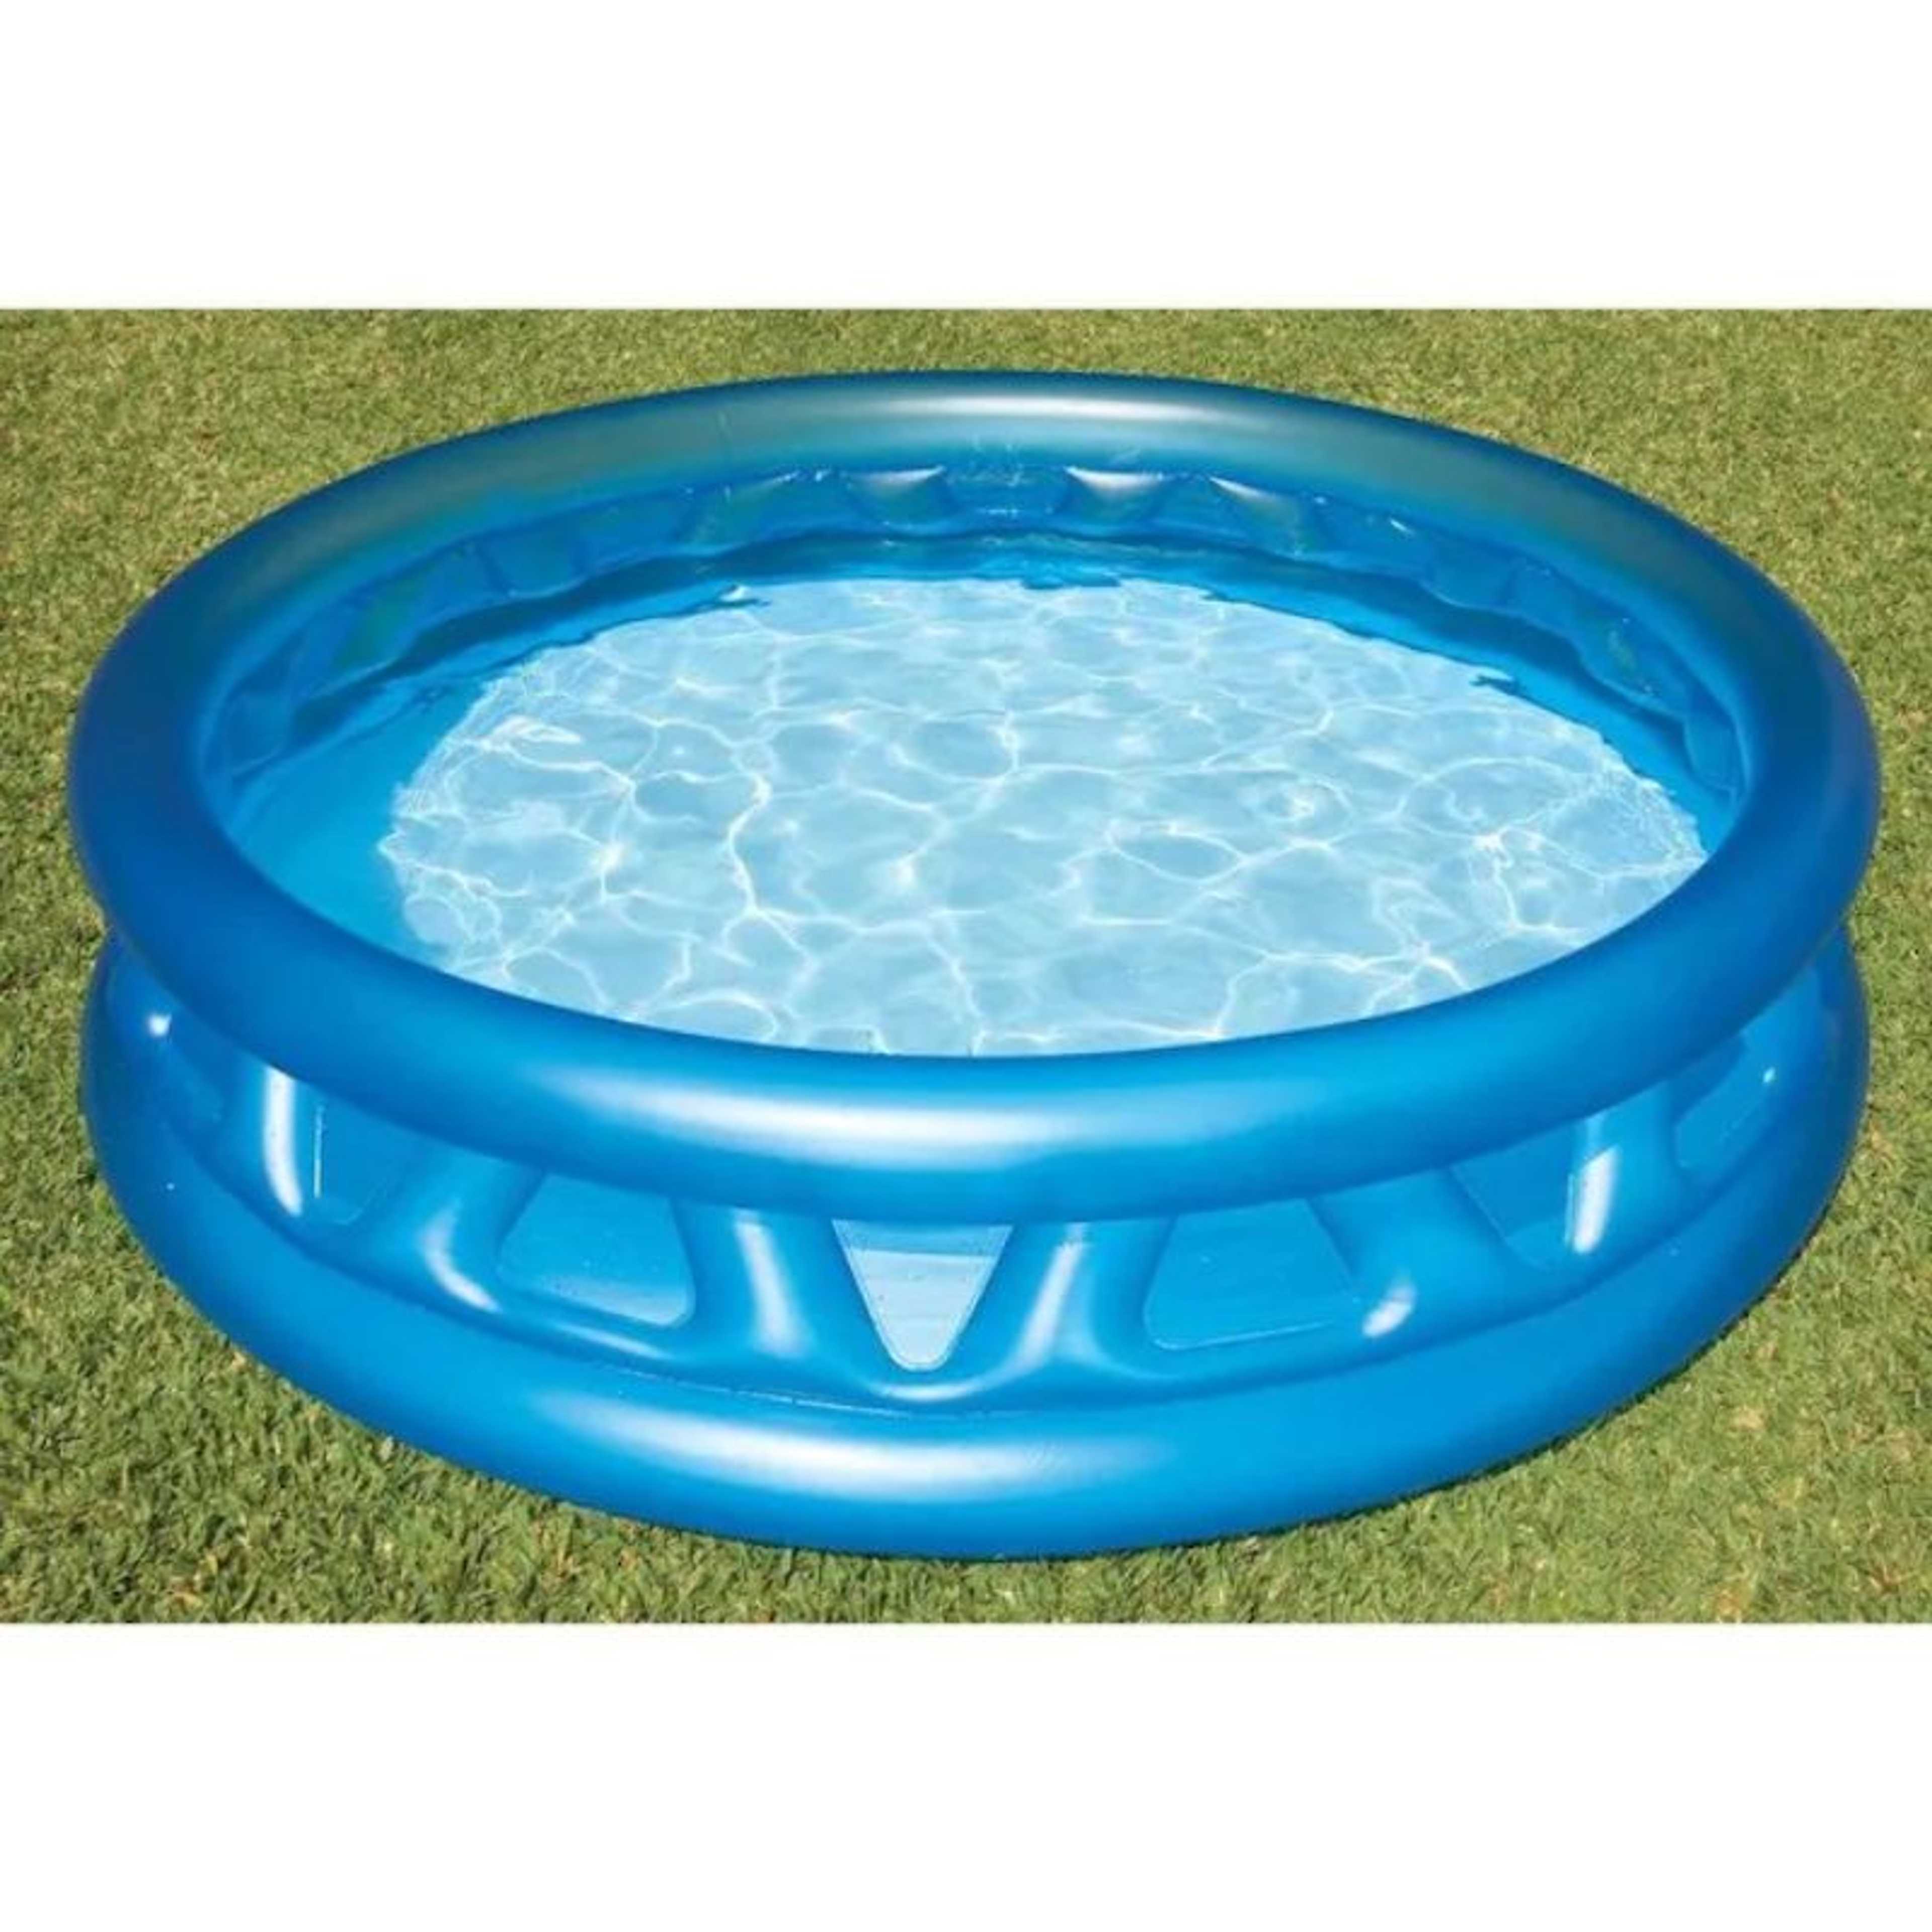  74" X 18" Intex Soft Side Round Inflatable Garden Swimming Pool For Kiddie,Adult